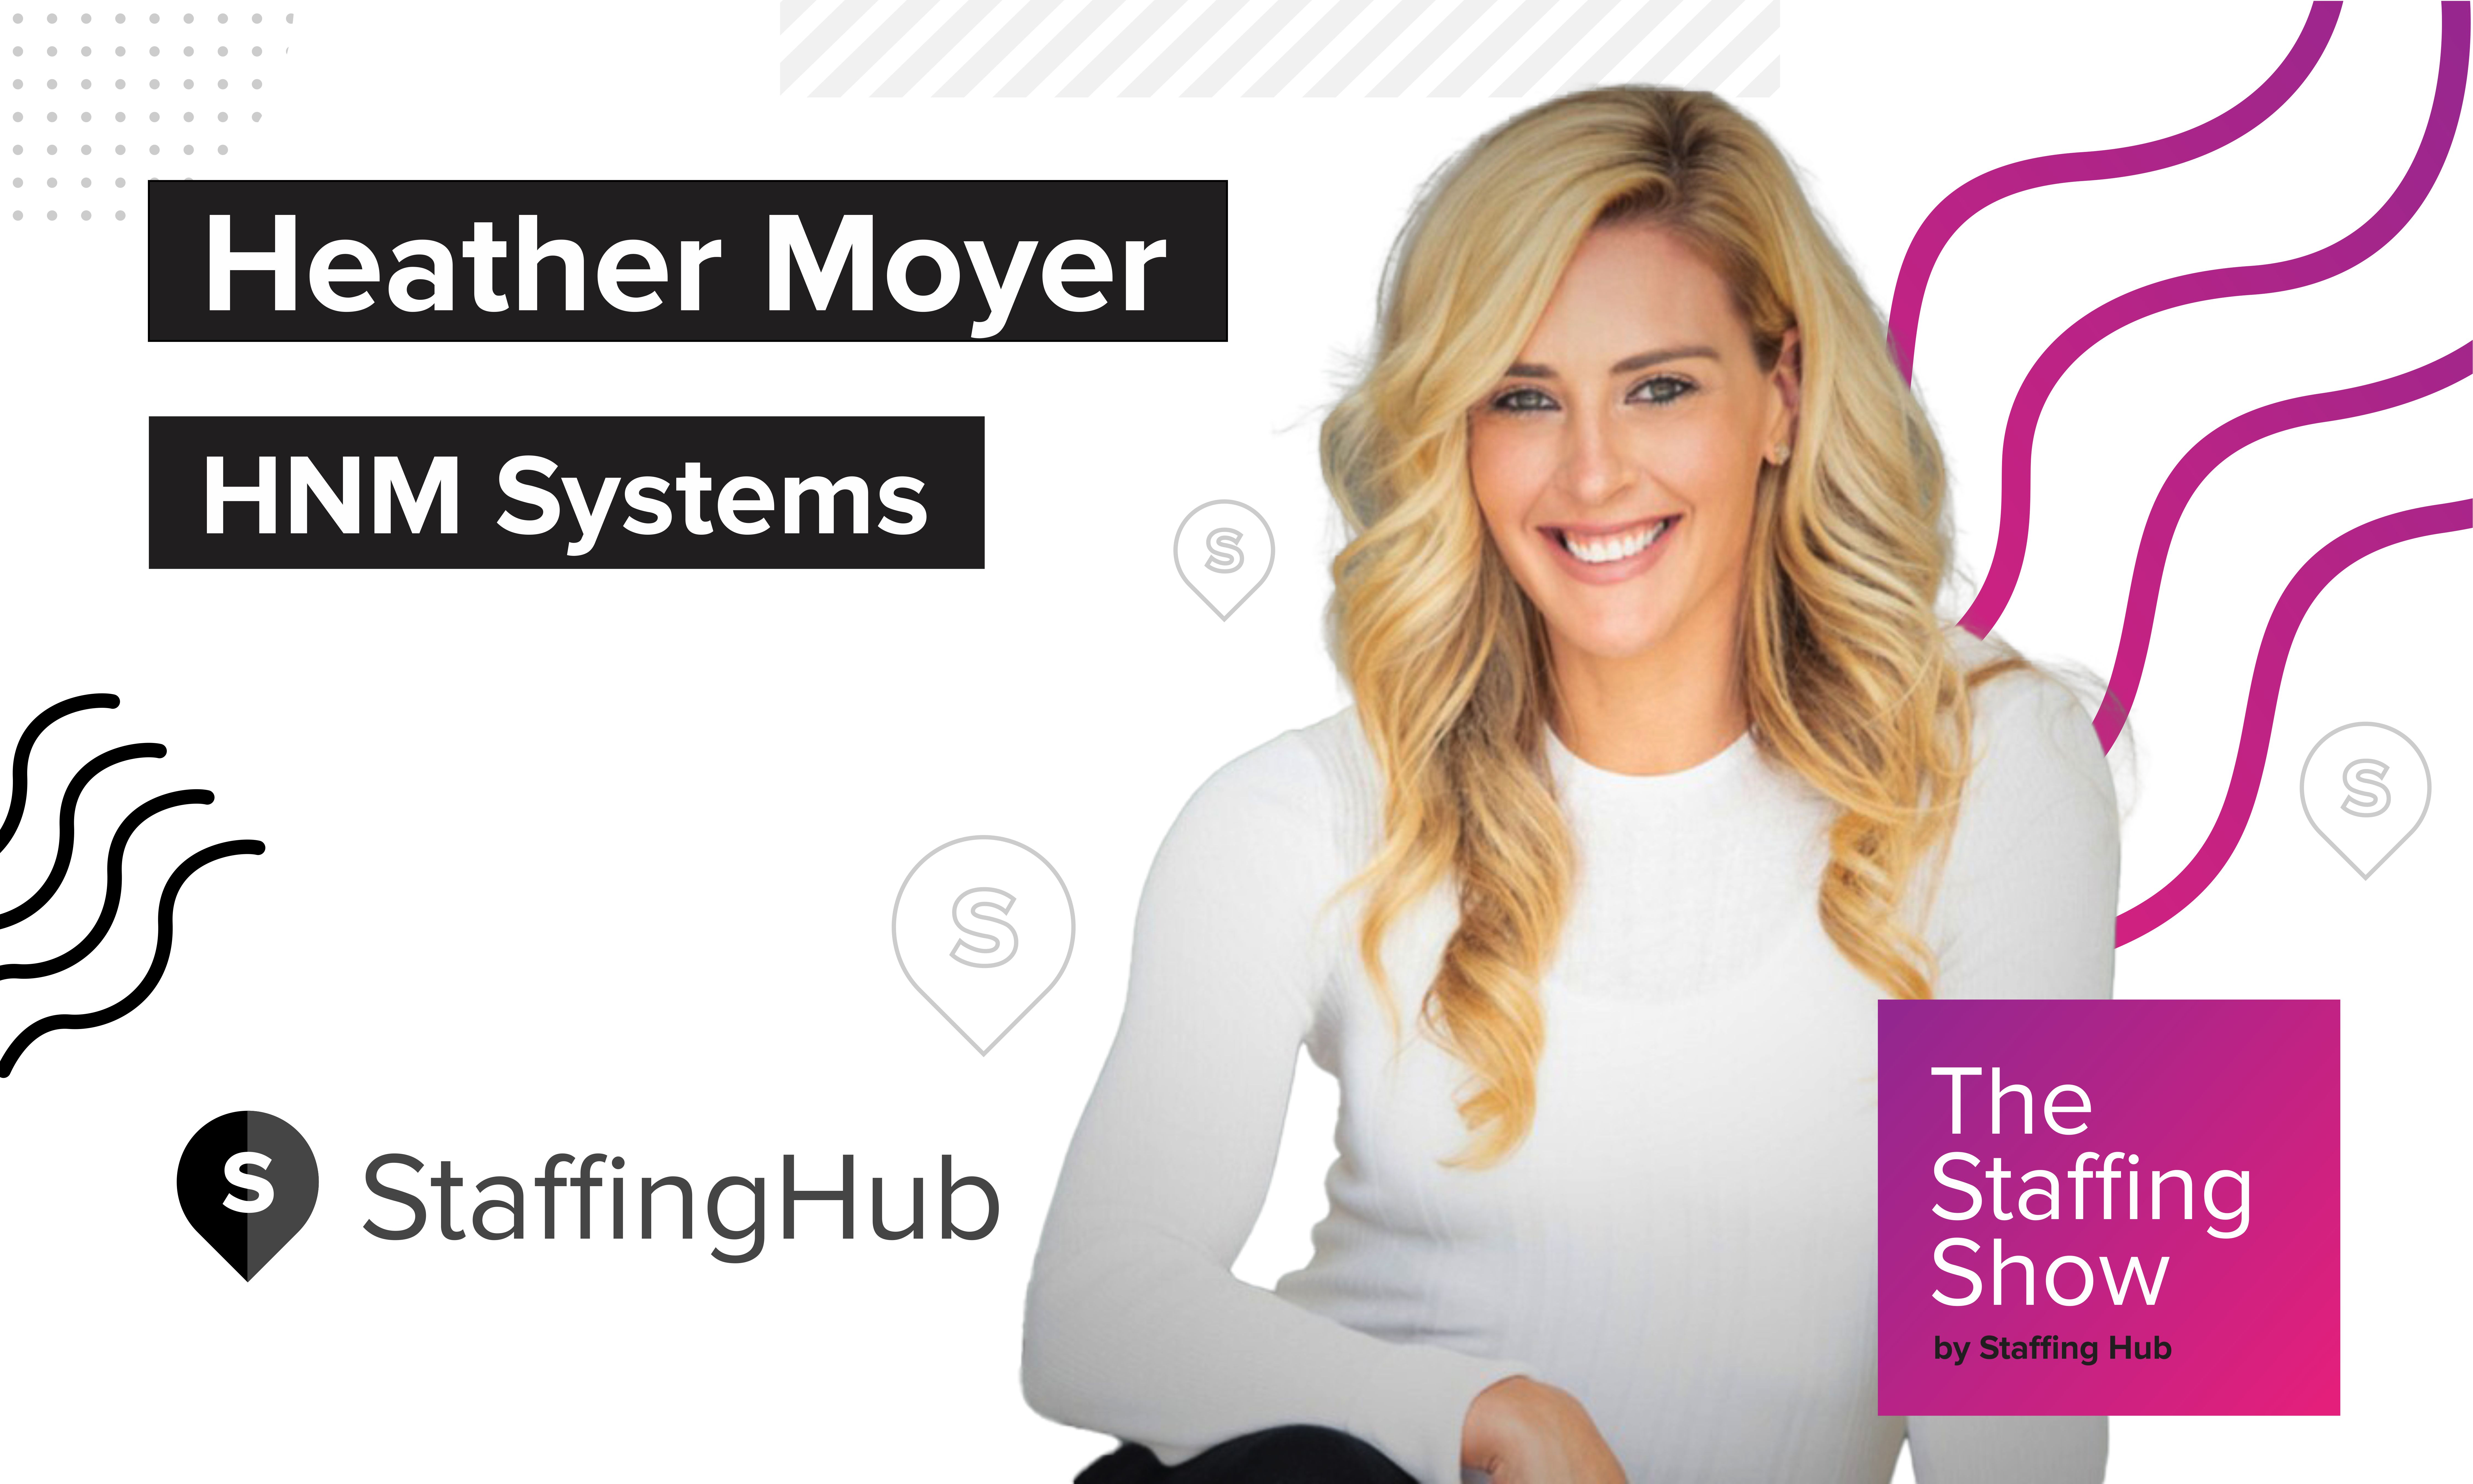 Heather Moyer, Founder and CEO of HNM Systems, on Entrepreneurship and Leading With Authenticity